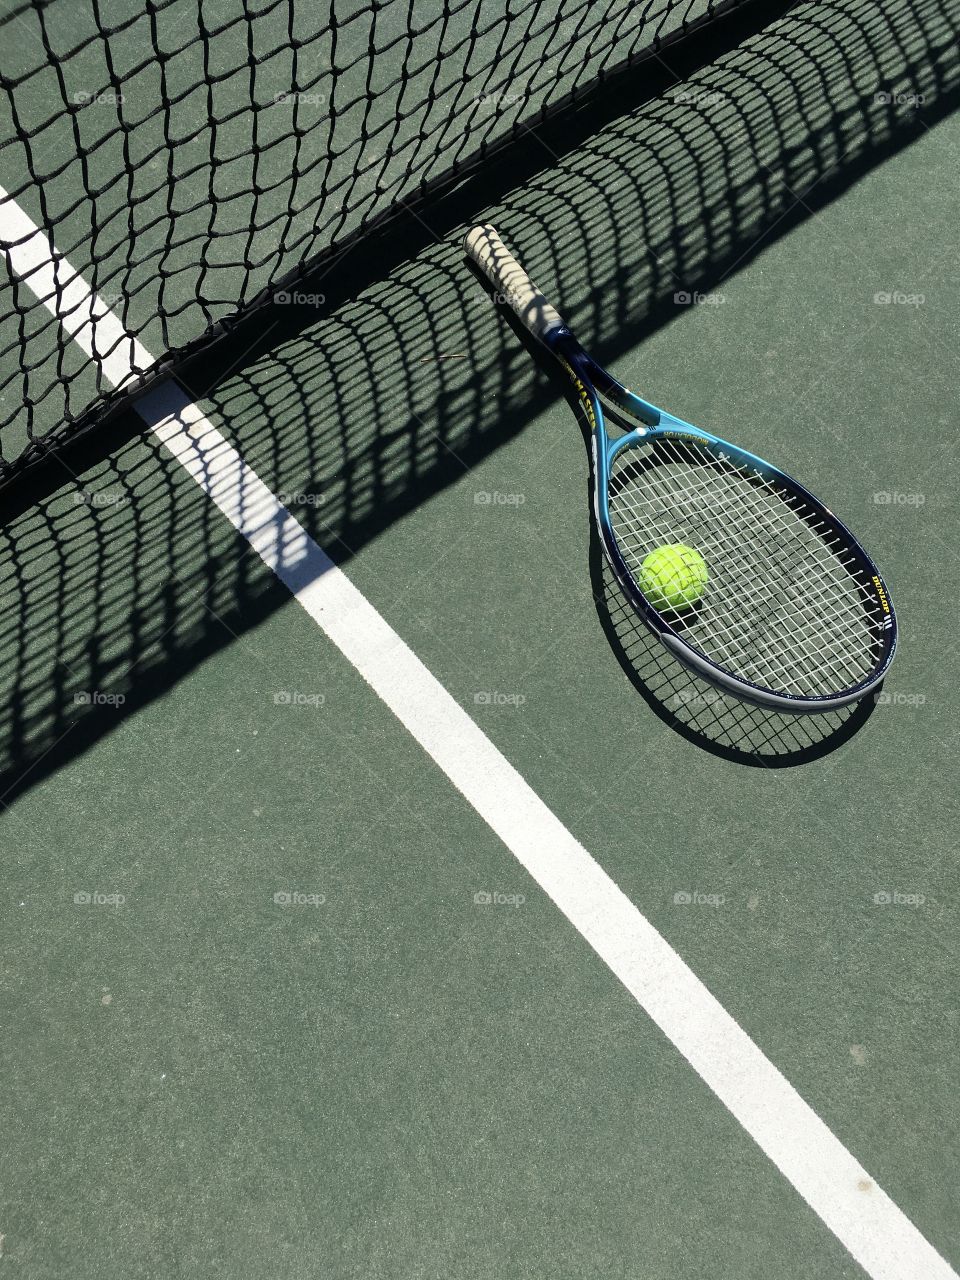 Tennis equipment illuminated on a court against shadows from the net 